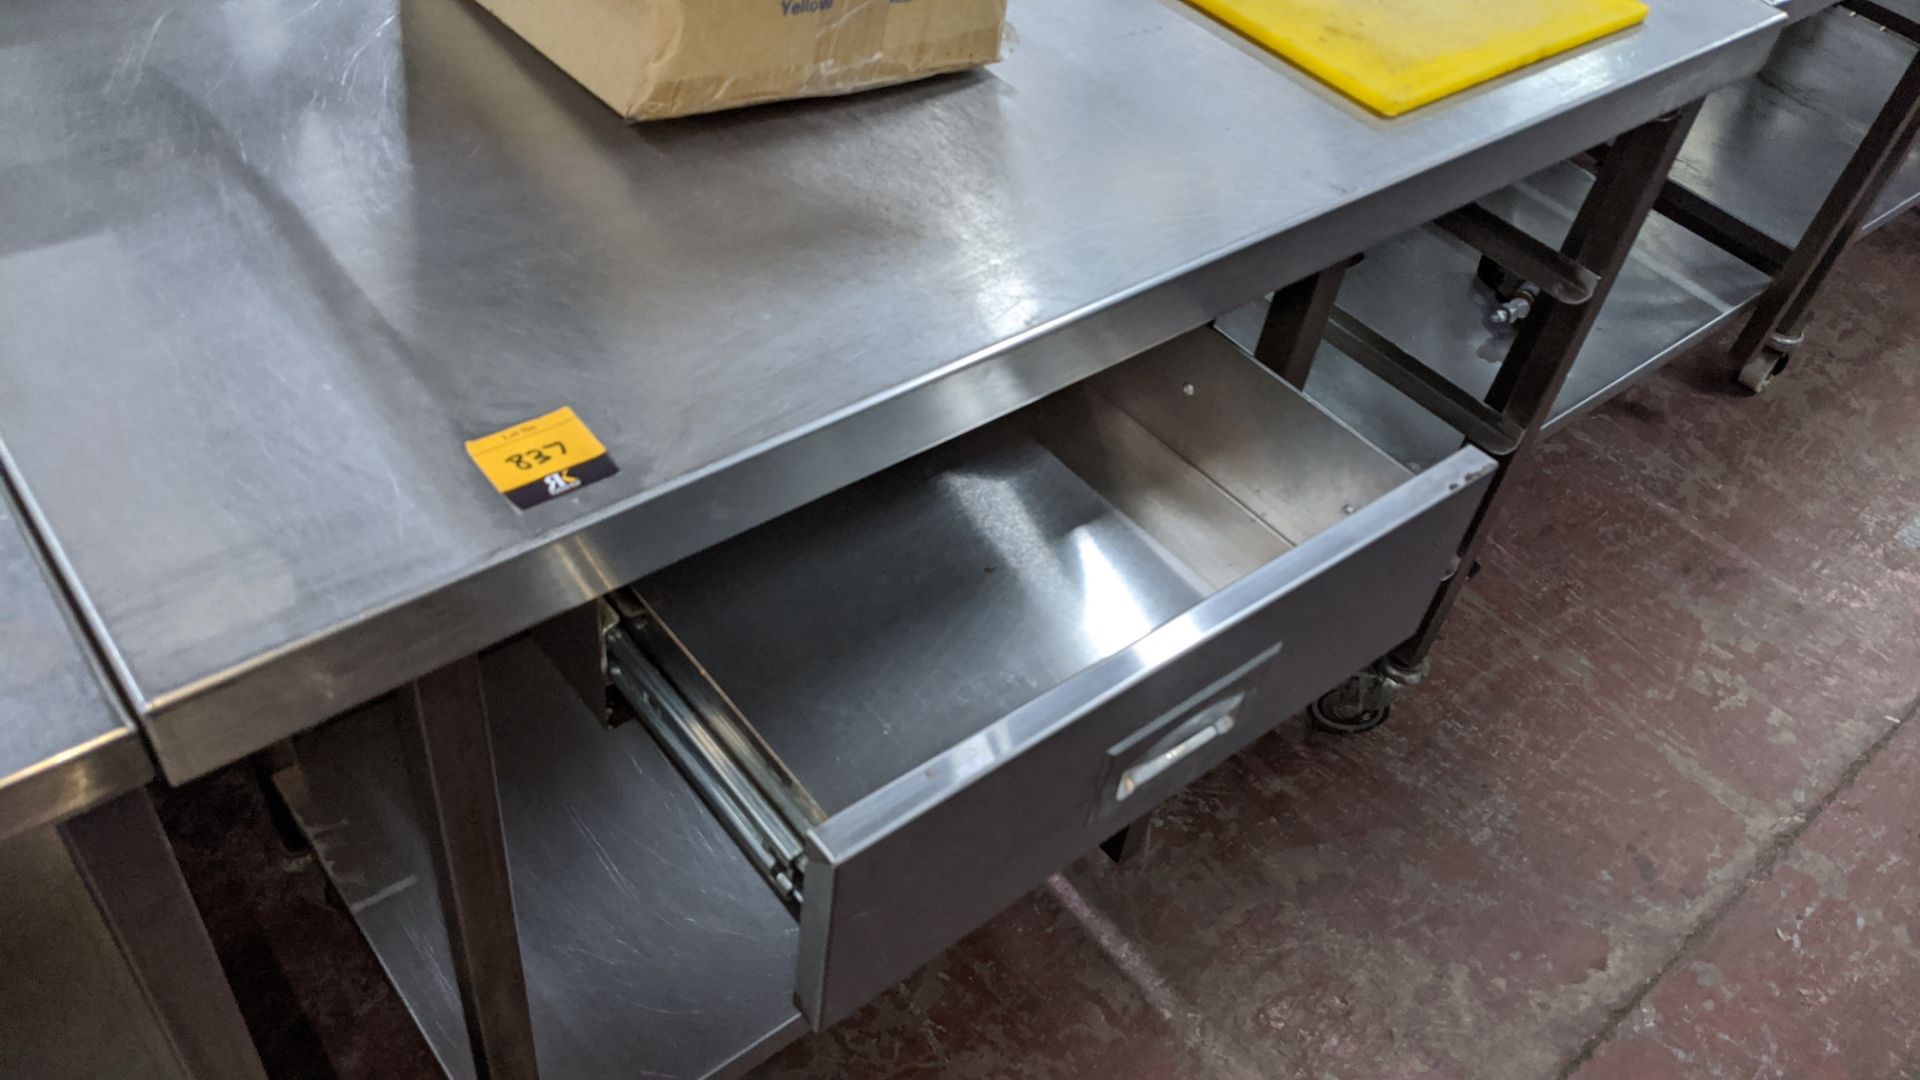 Stainless steel mobile multi-tier table incorporating drawer, shelving & more - 1200mm x 650mm. - Image 3 of 5